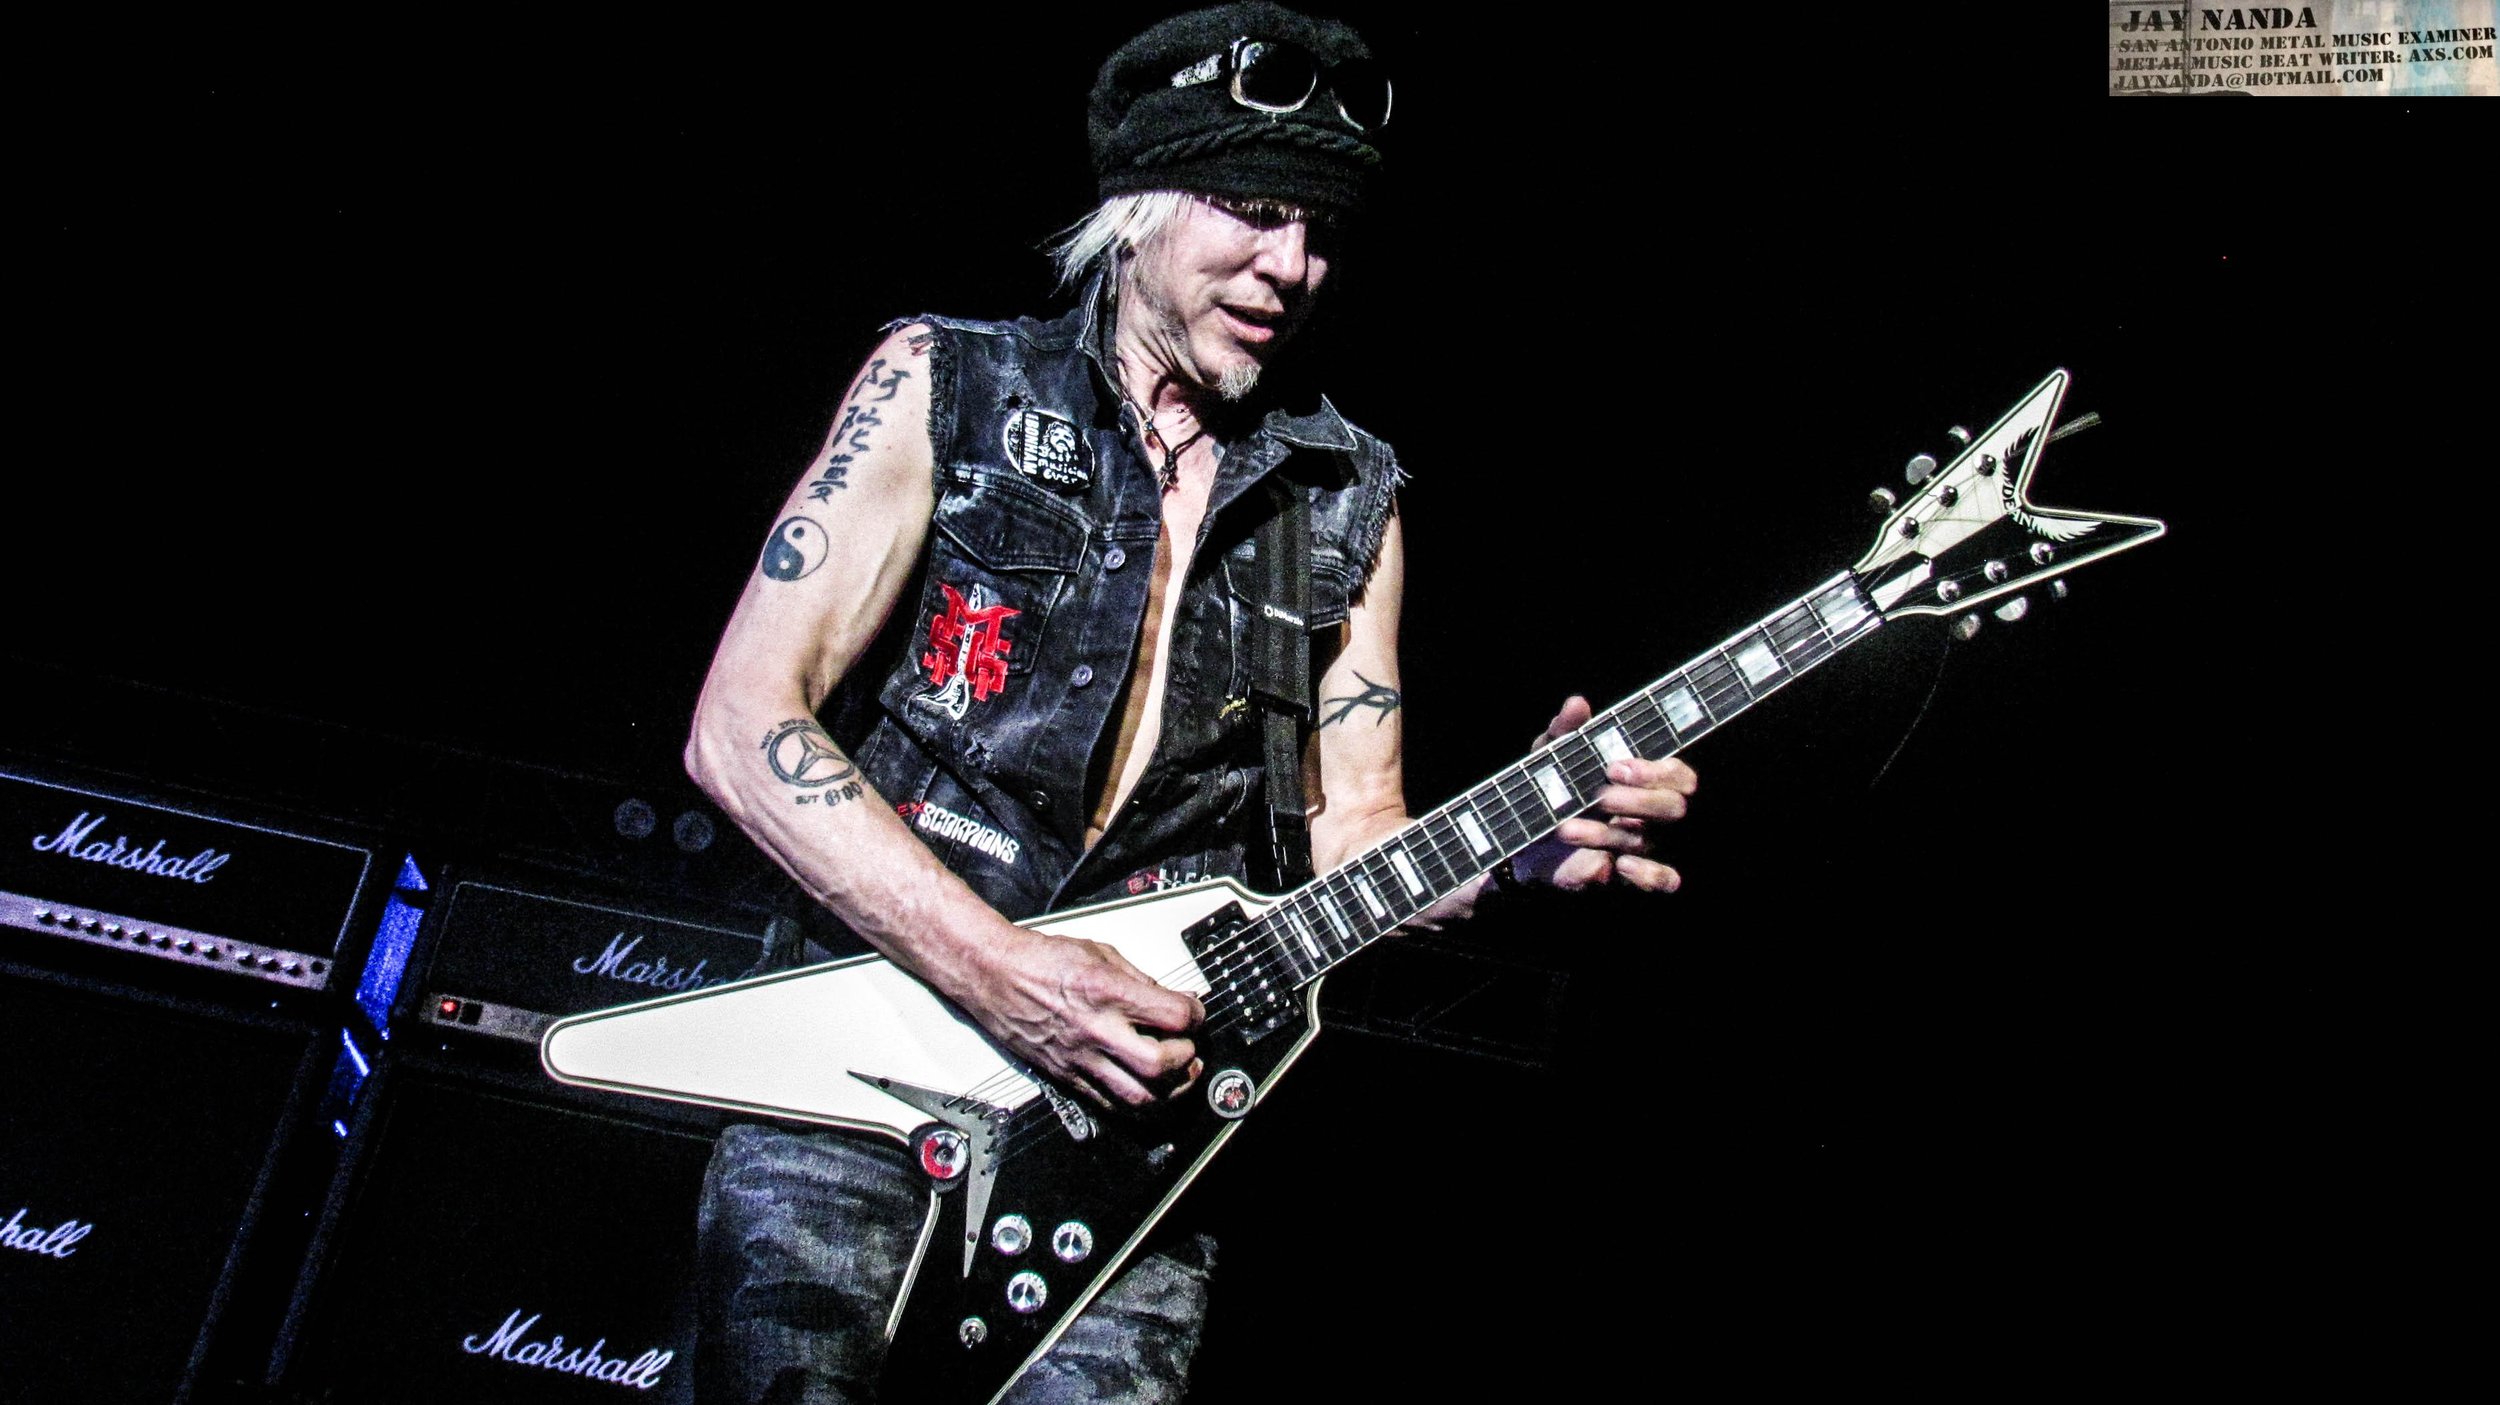  Schenker's previous visit to San Antonio in 2015 featured former Scorpions drummer Herman Rarebell and bassist Francis Buchholz, but the Fest marks a completely new lineup. 